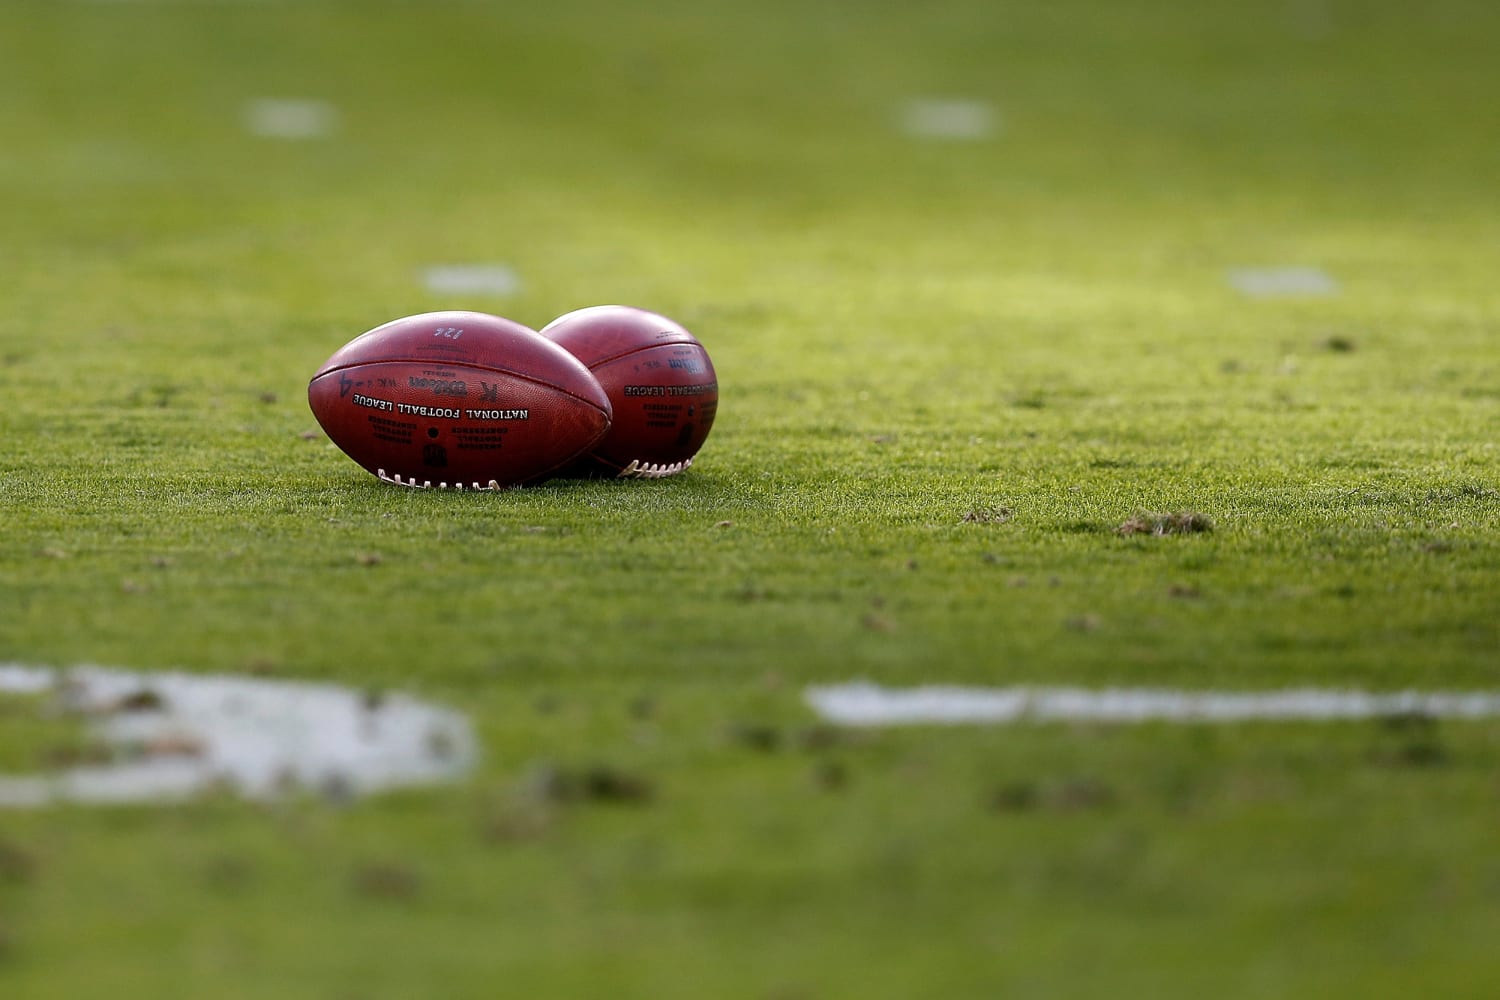 NFL reschedules 3 games as new wave of Covid sidelines dozens of players